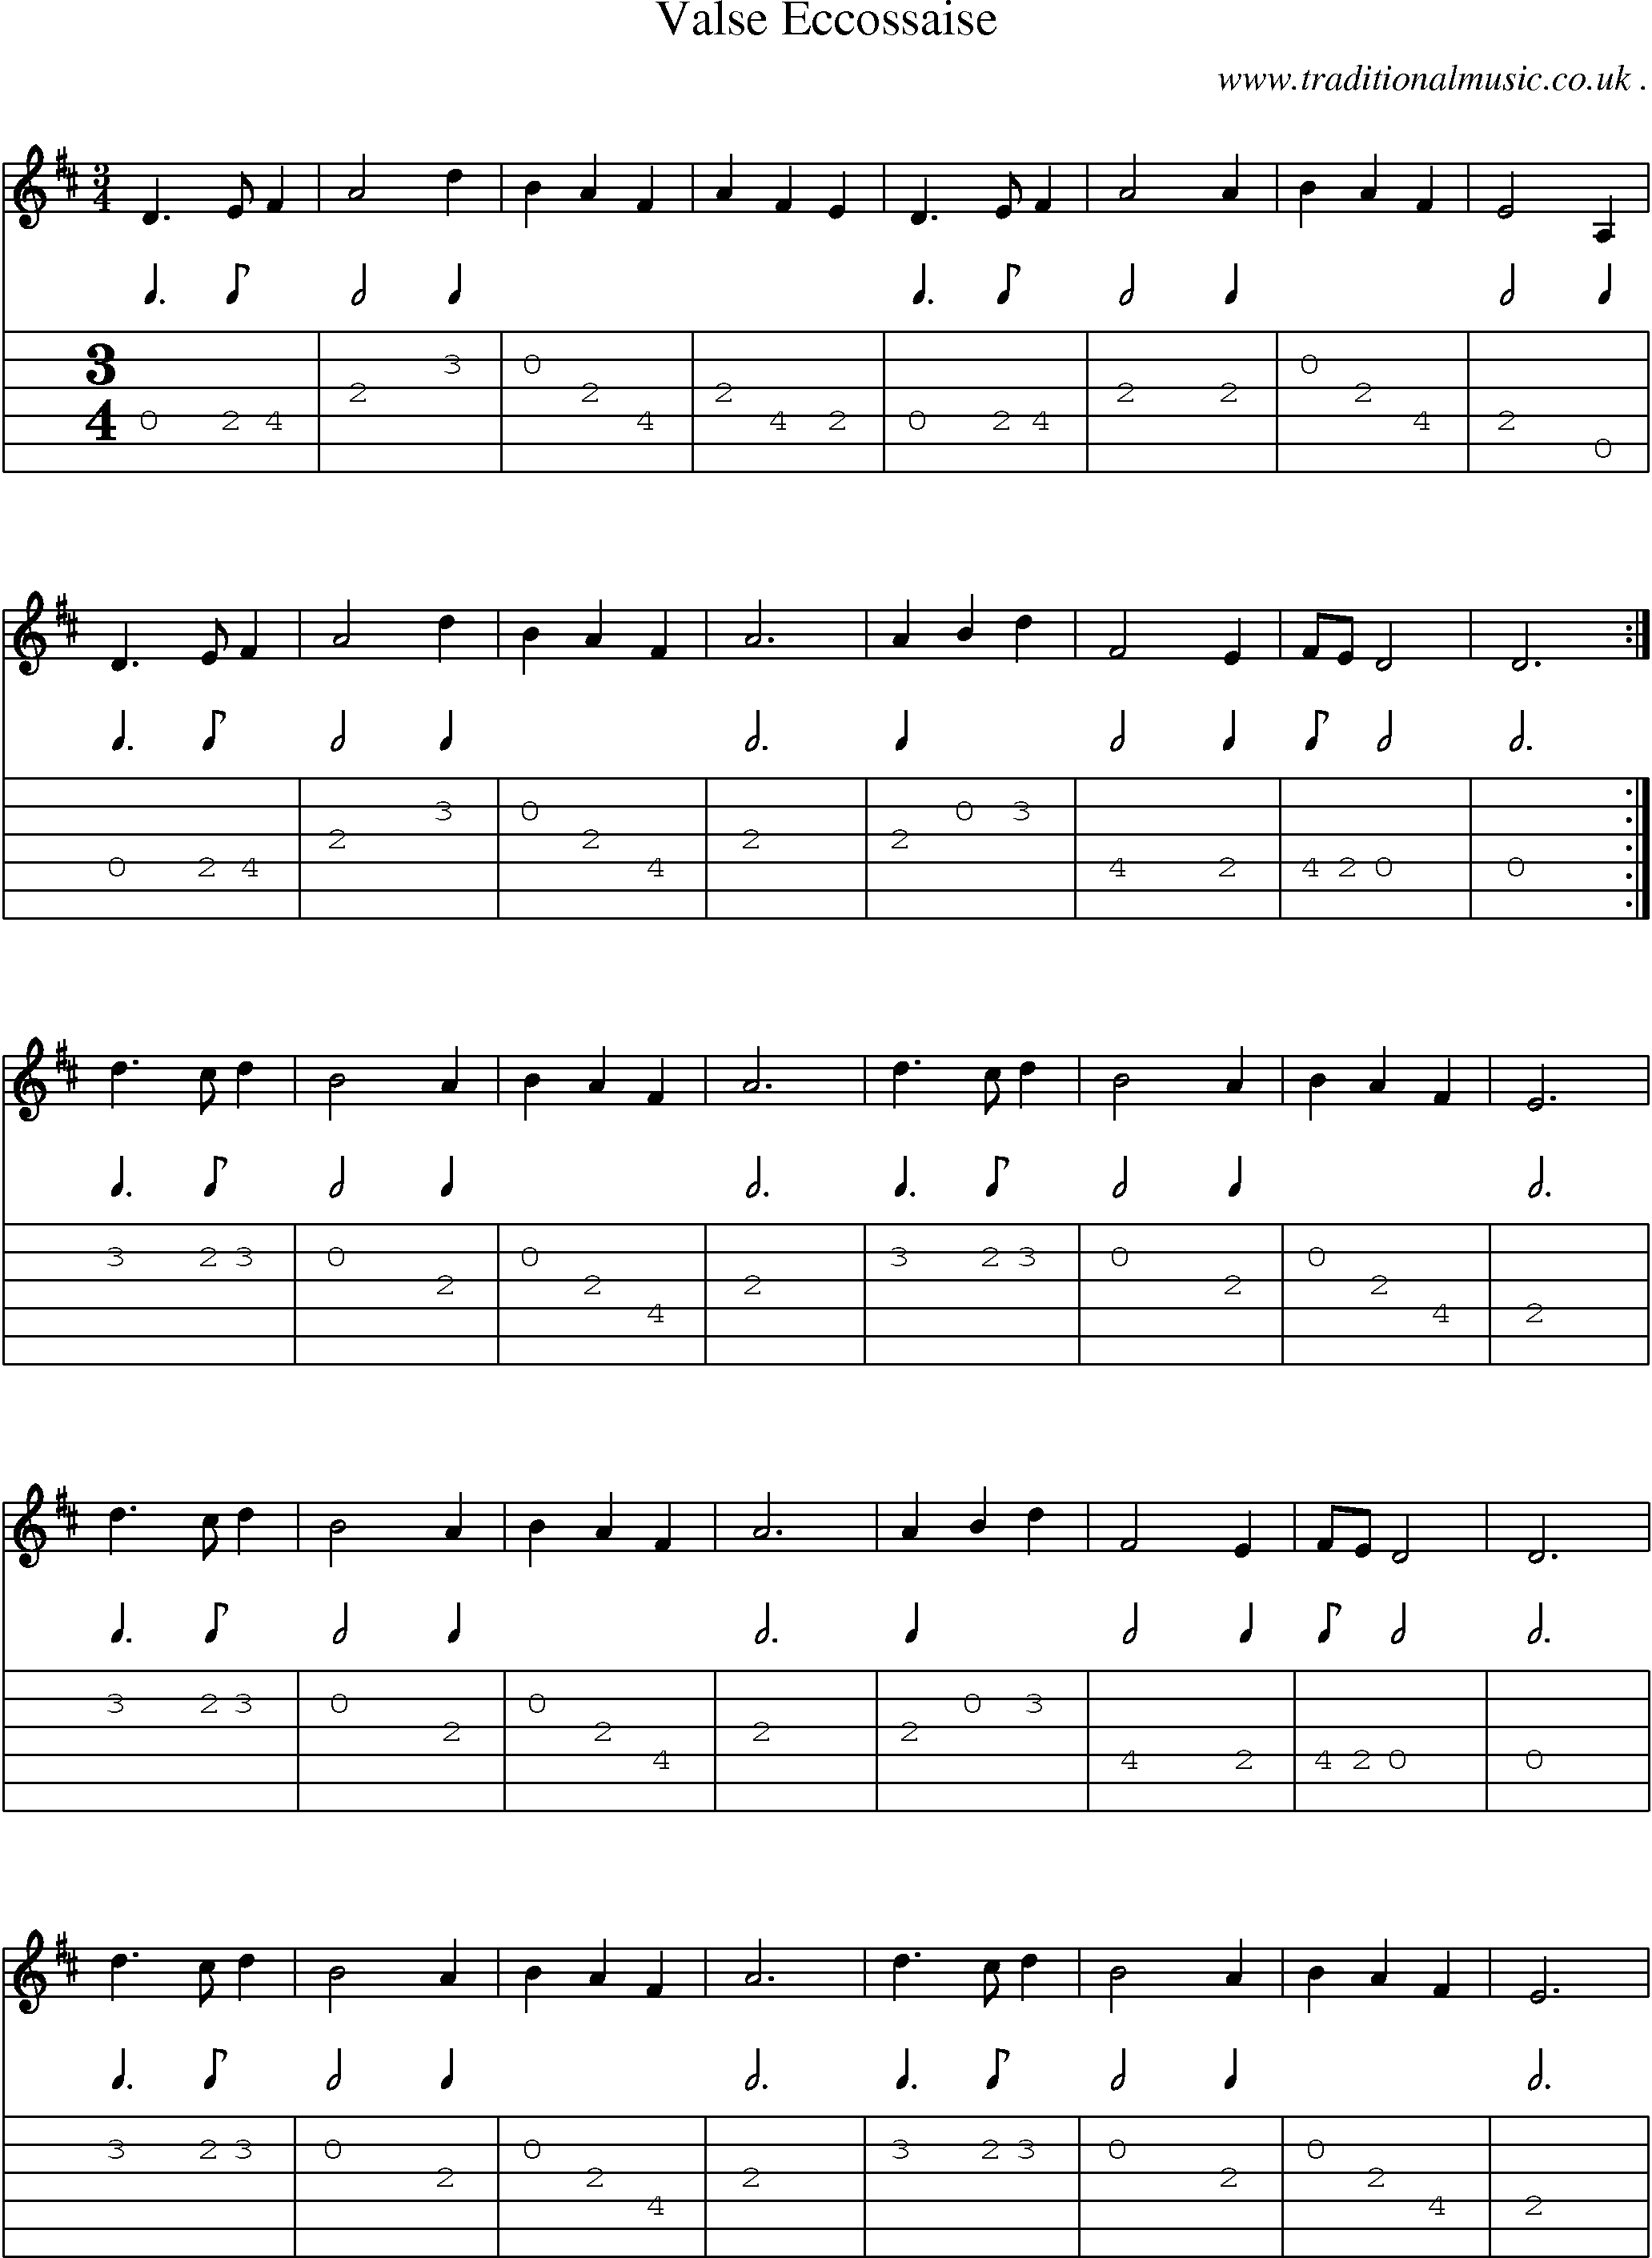 Sheet-music  score, Chords and Guitar Tabs for Valse Eccossaise